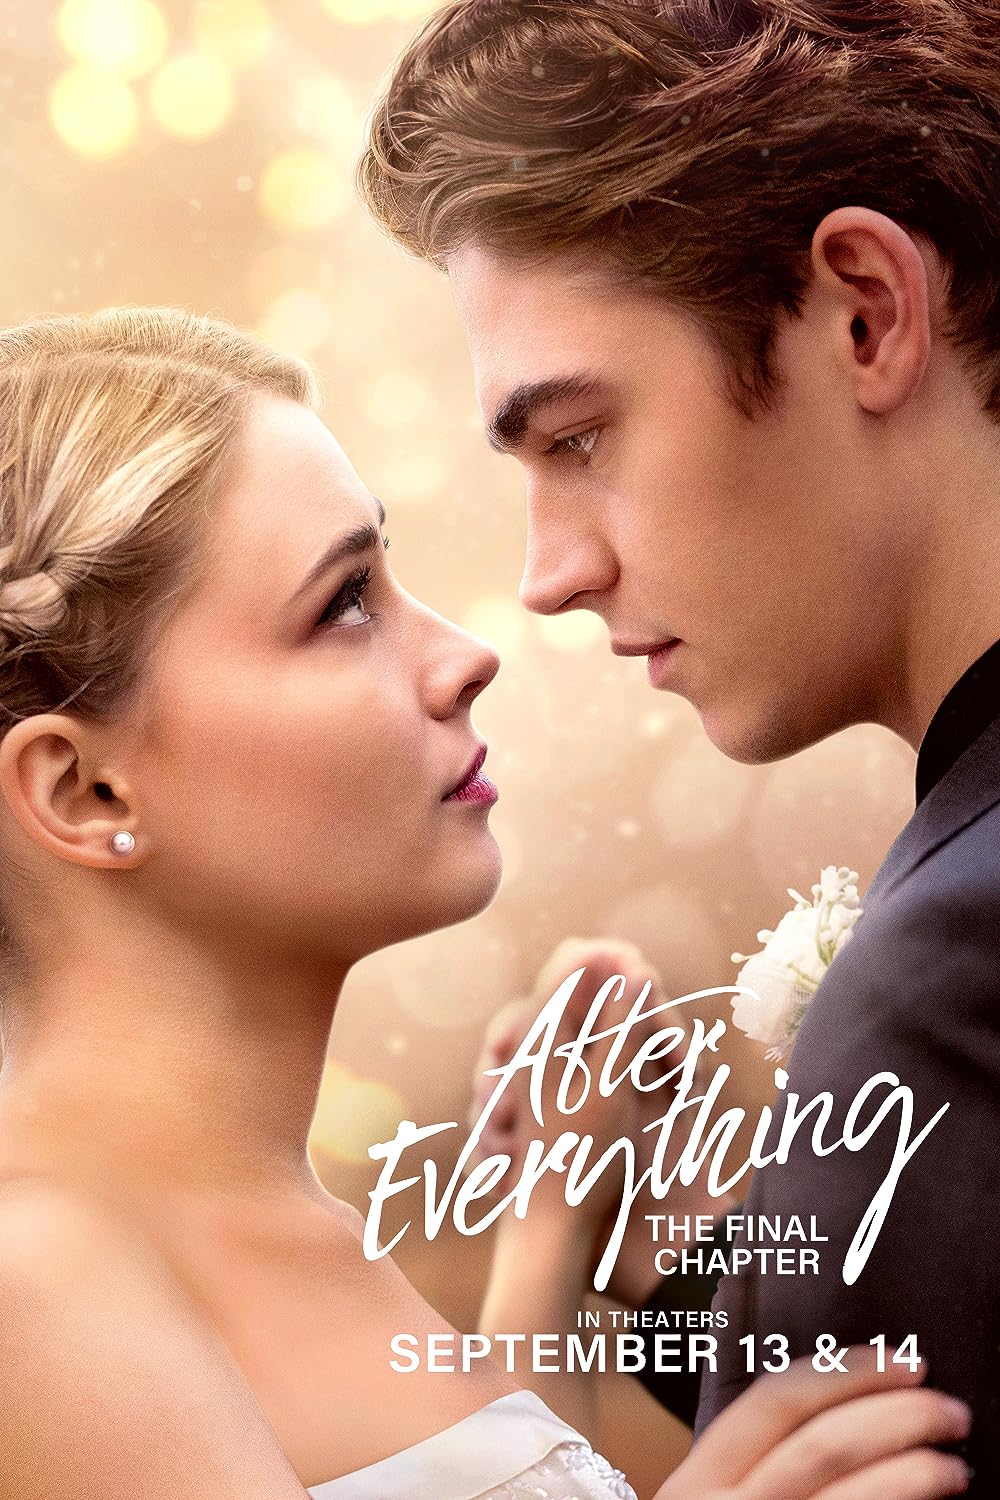 After Everything (February 1) - Streaming on NetflixAfter Everything is a sequel to 